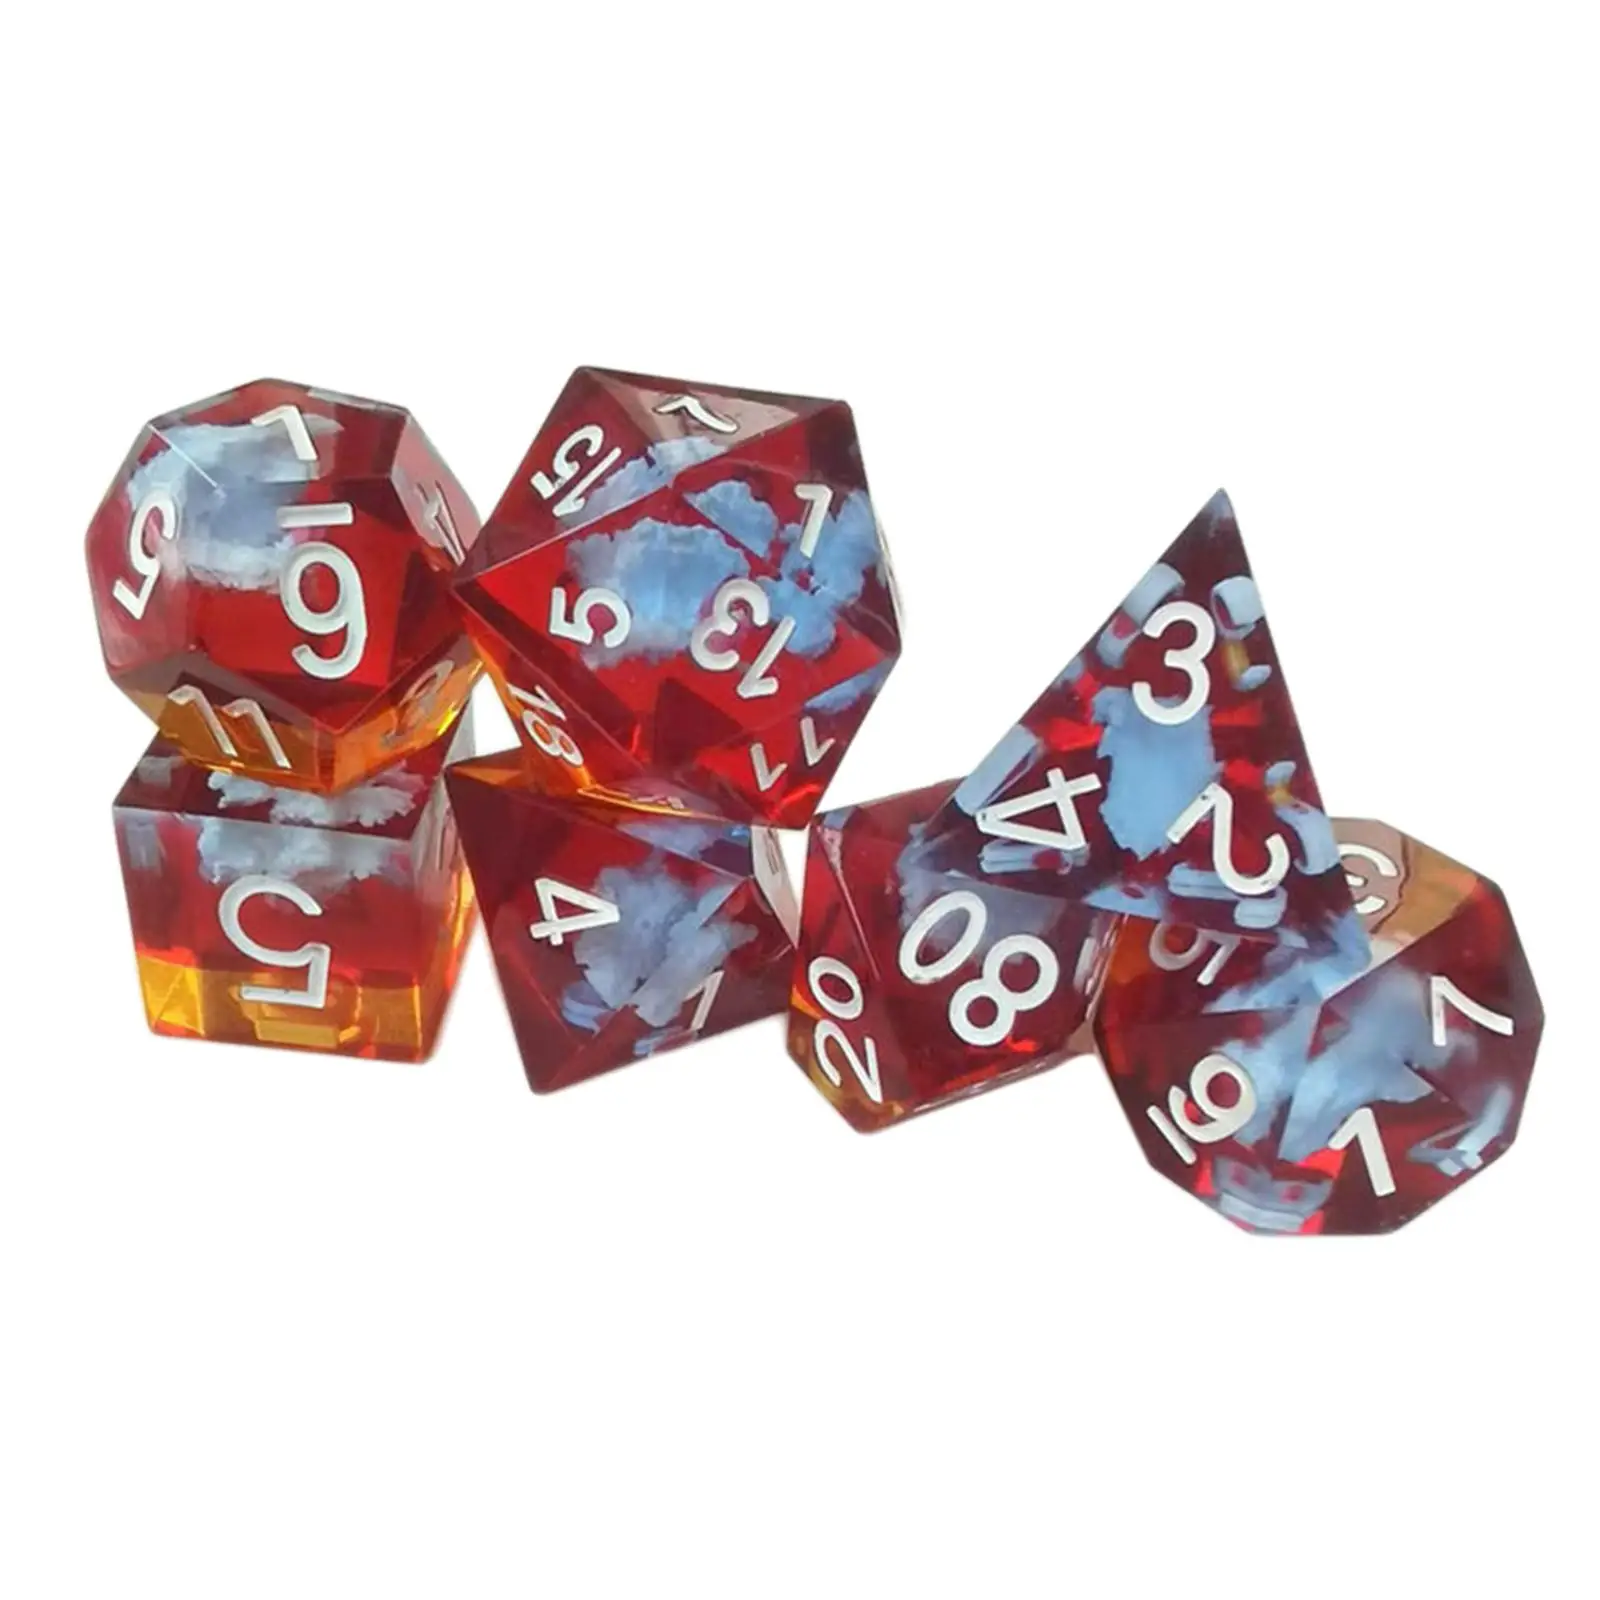 7 Pieces Resin Polyhedral Dice Table Games Entertainment Toy Dice Sets for Family Gathering Board Role Playing Game Bar